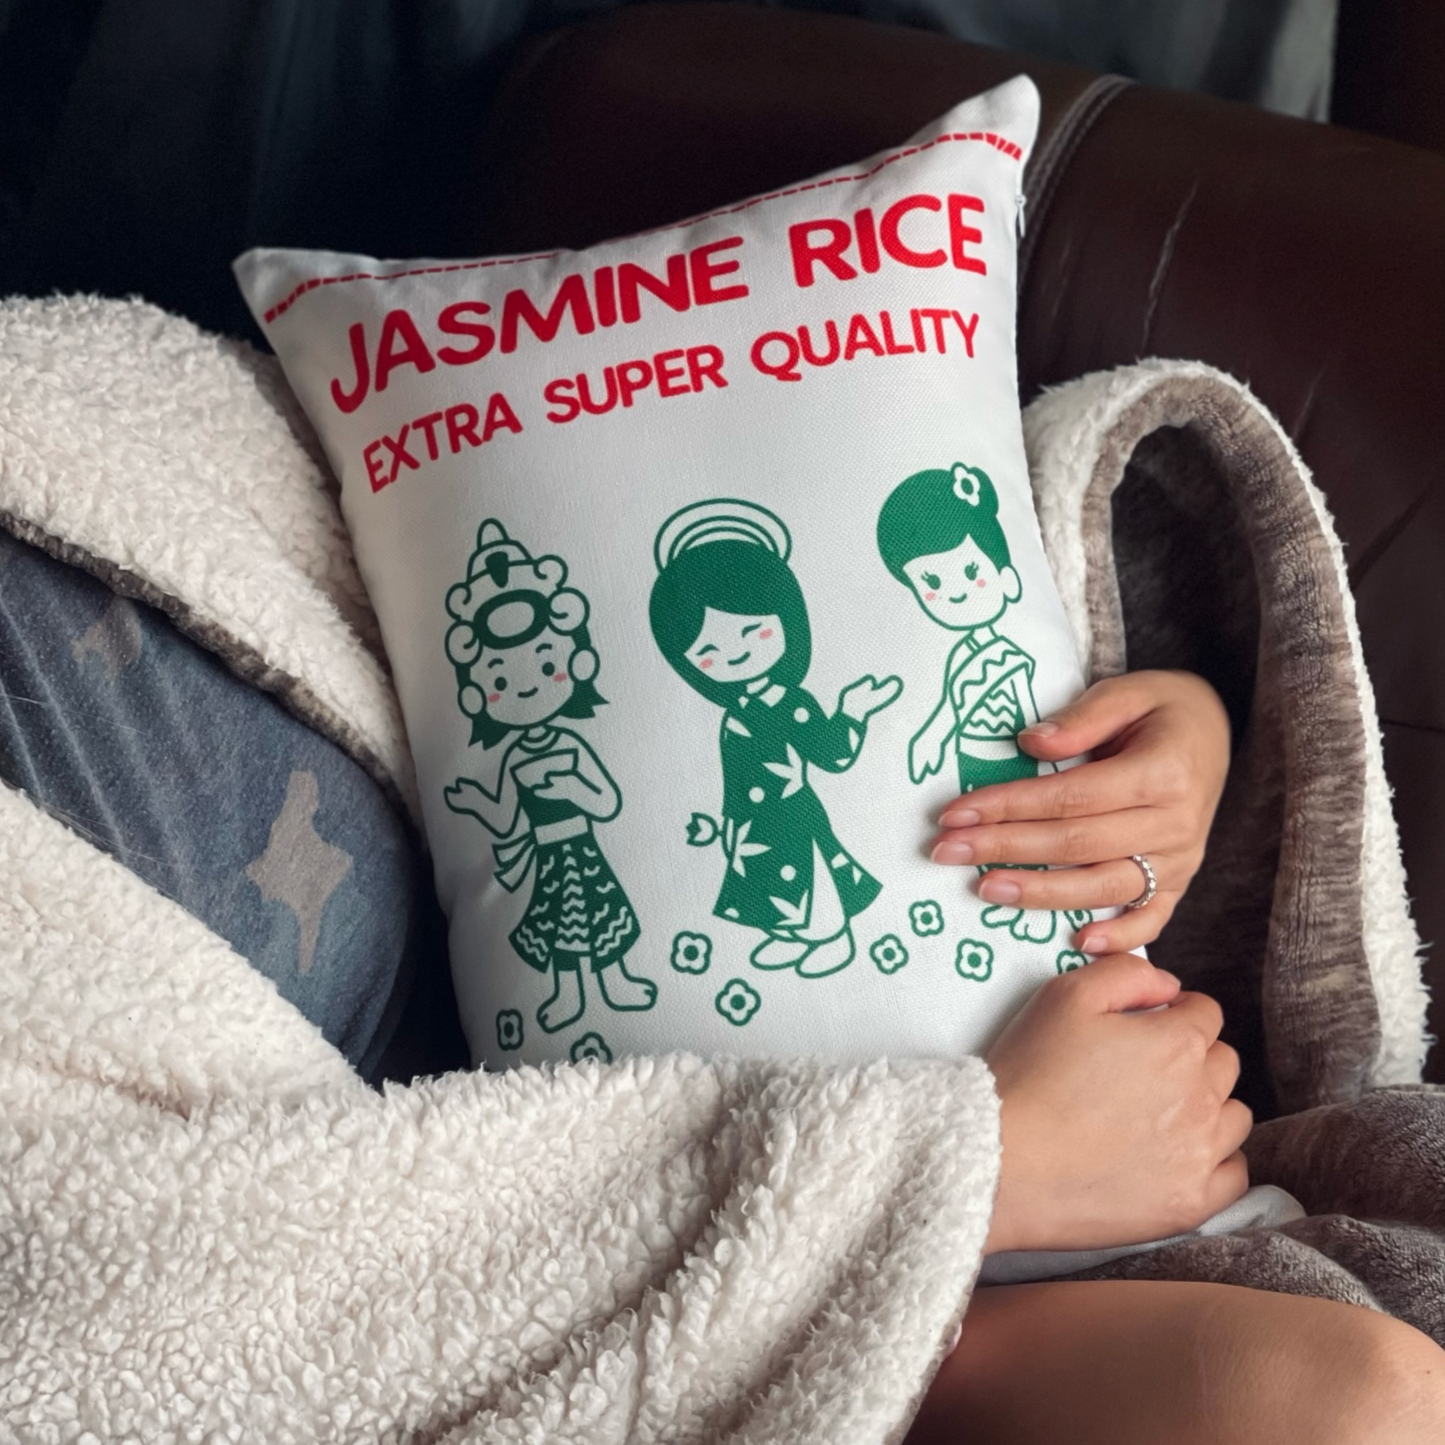 Front of the pillow, inspired by Jasmine Rice packaging, held in the hands of a woman in a seated position. The pillow features a kawaii-style illustration of three girls in green dresses on a white background. The playful design resembles the vibrant and culturally inspired imagery found on Jasmine Rice packaging. The woman's hands showcase the size and texture of the pillow, inviting a cozy and comforting experience.